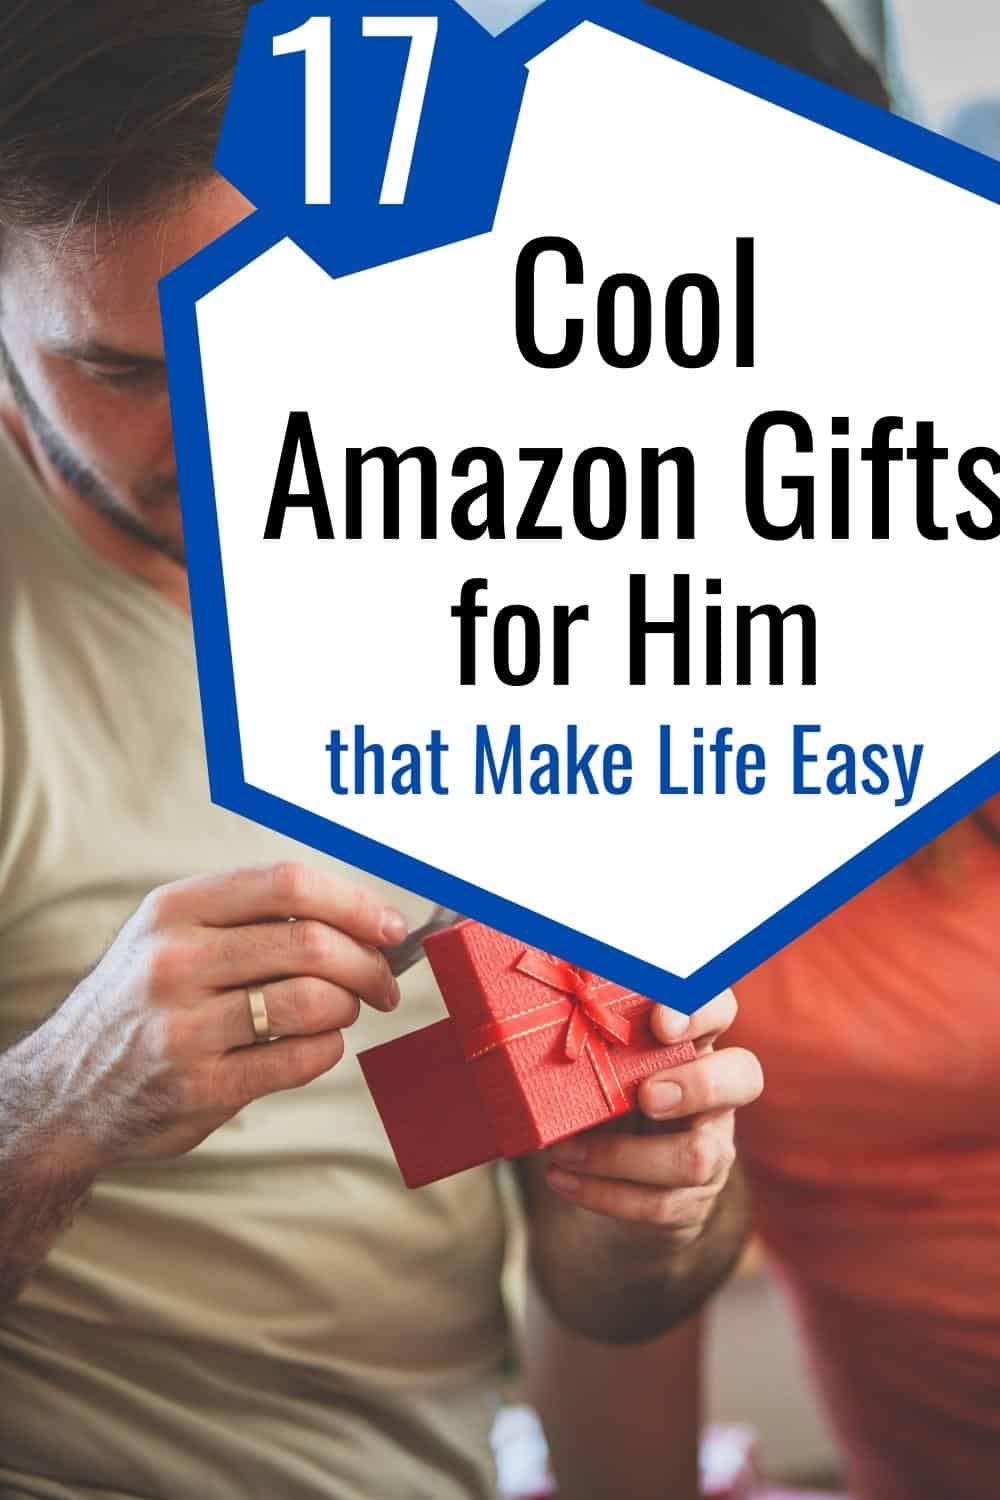 17 cool Amazon Gifts for Him